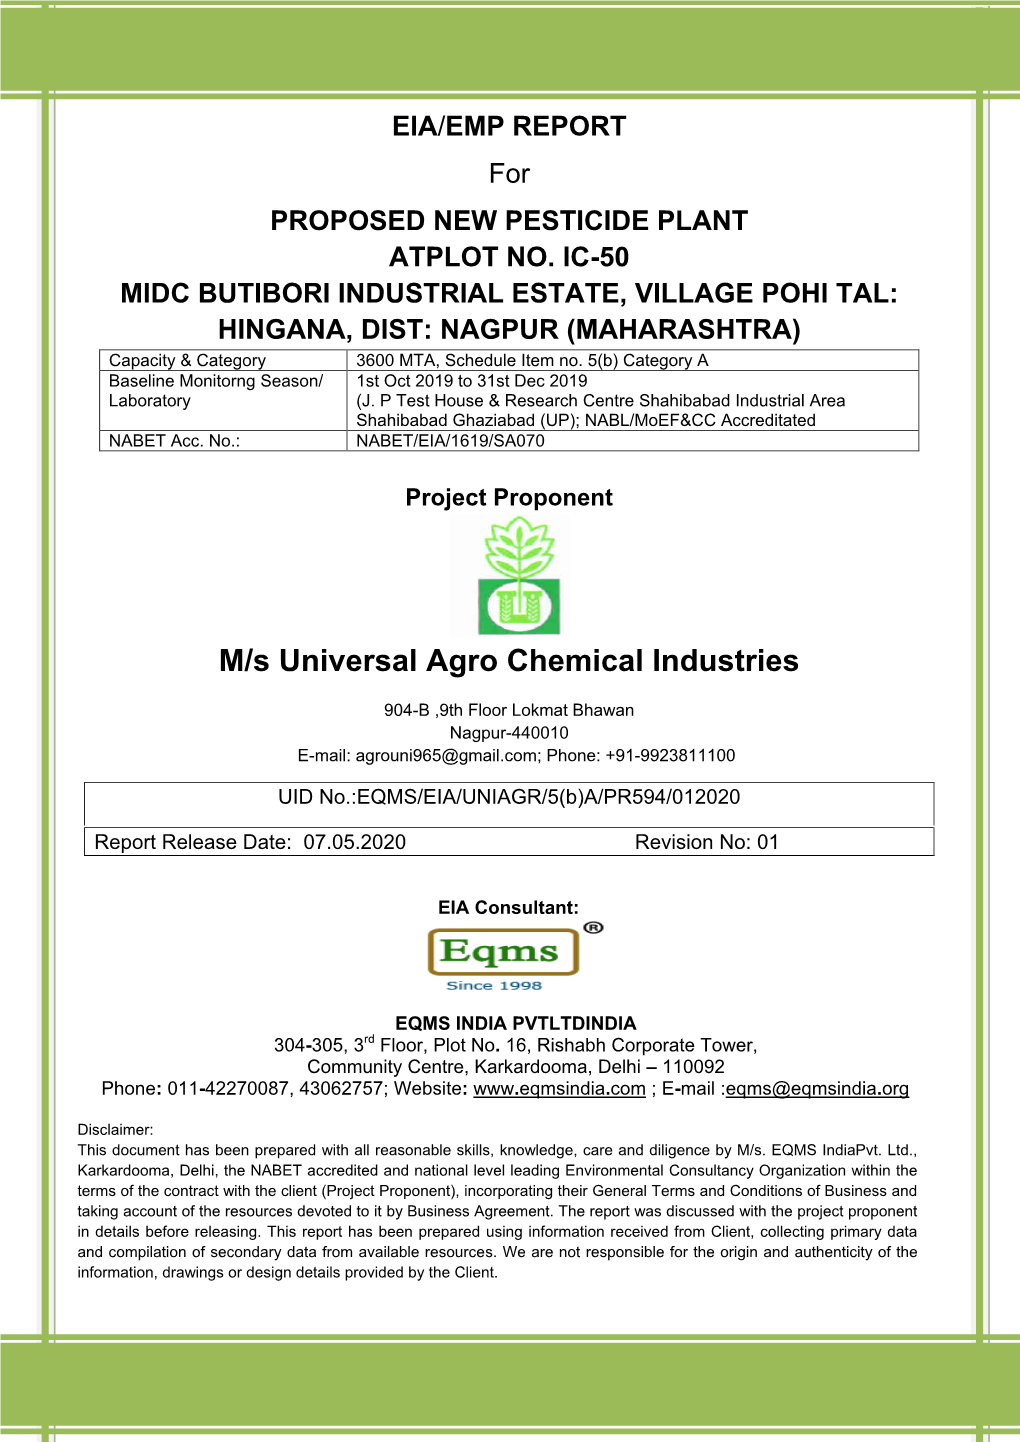 M/S Universal Agro Chemical Industries